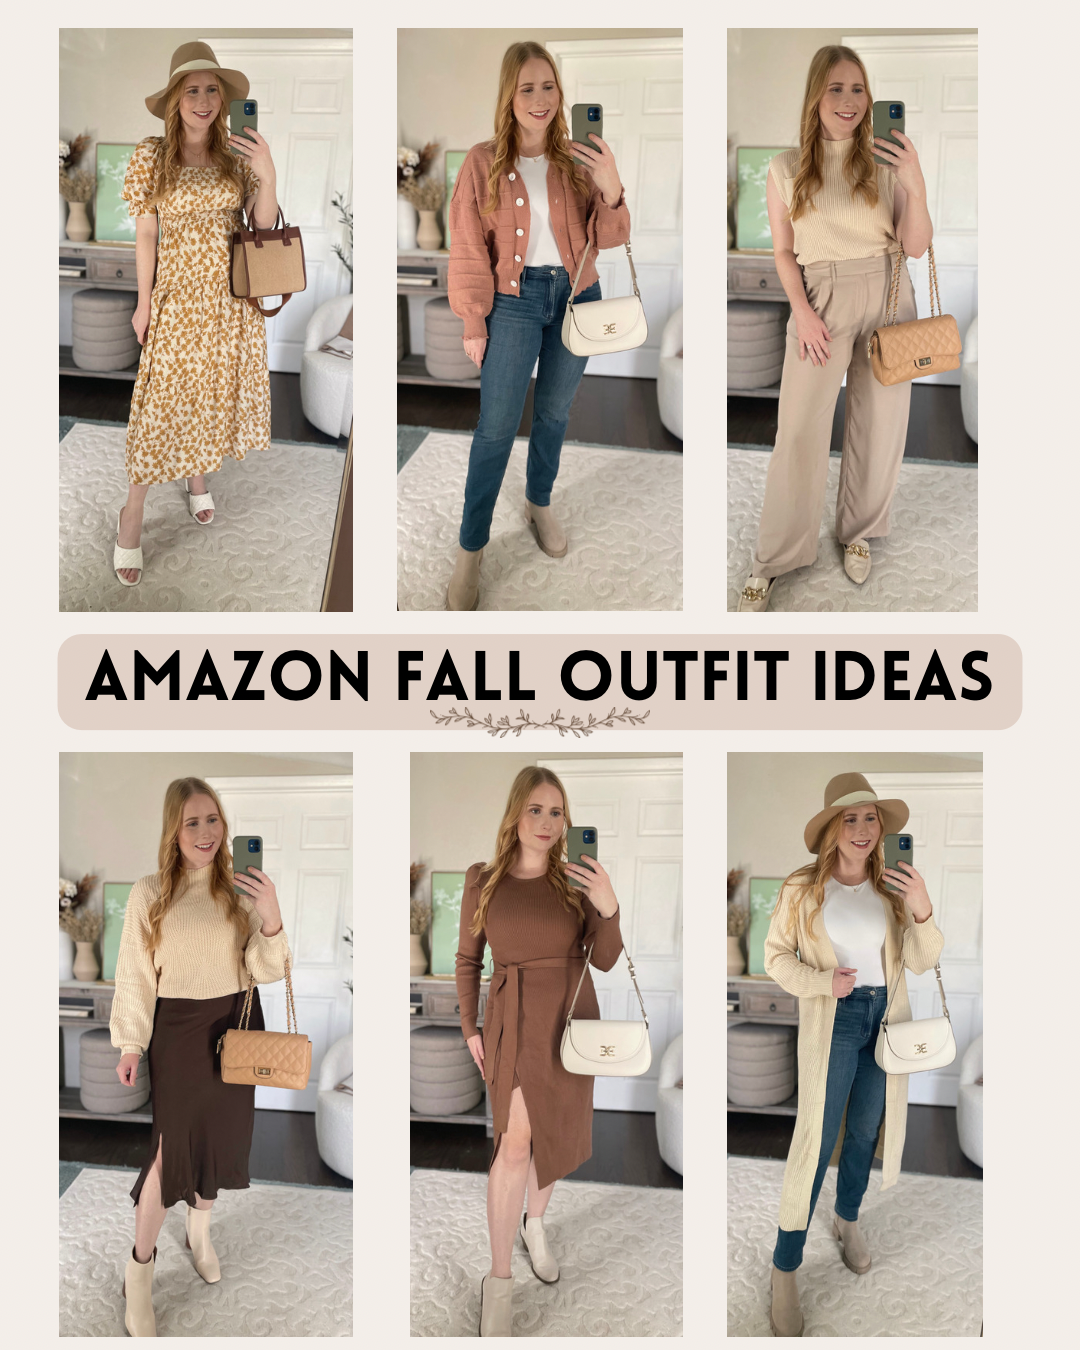 Women's Fall Fashion on Amazon - Amazon Fall Outfit Ideas 2023 - Best Amazon Fashion Finds for Fall 2023 - Affordable by Amanda